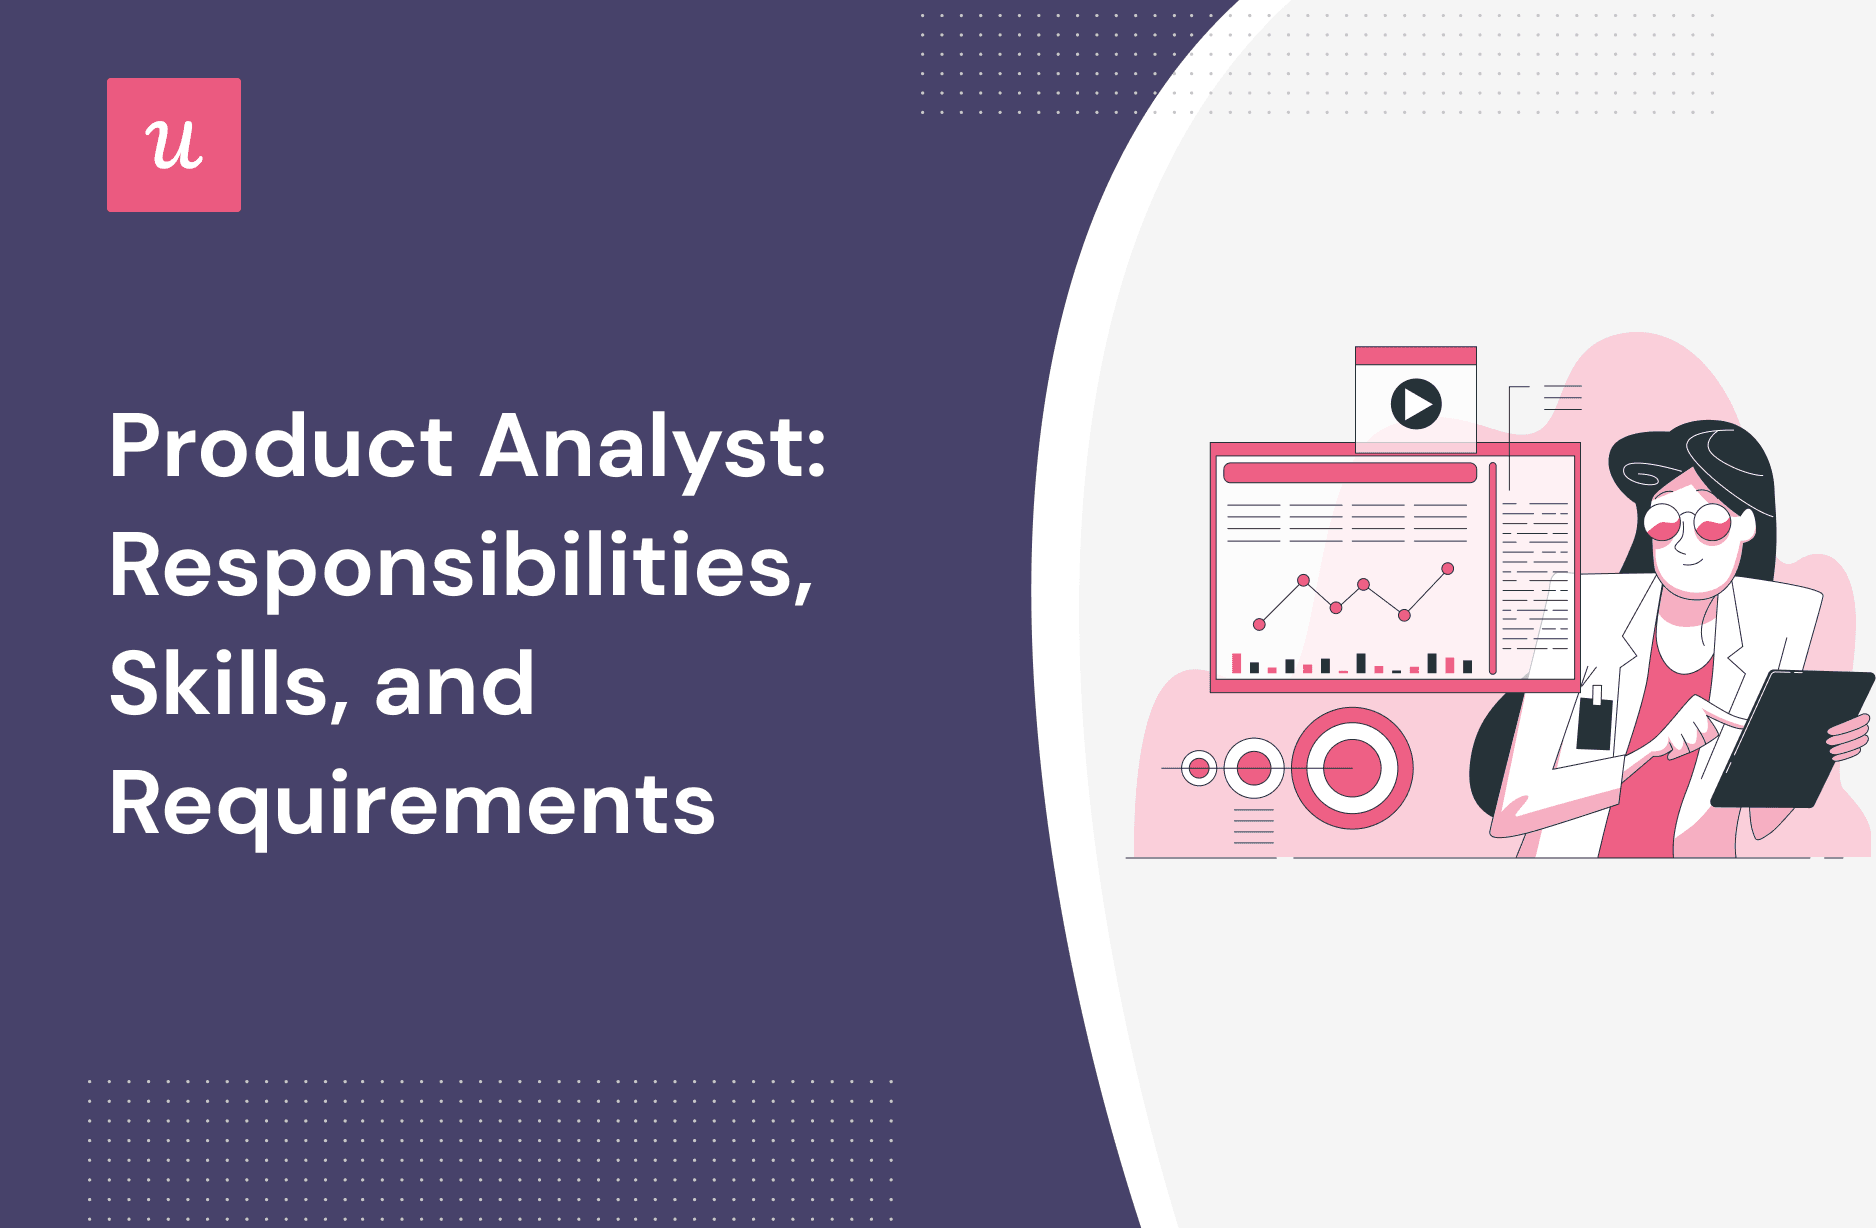 Product Analyst: Responsibilities, Skills, and Requirements cover